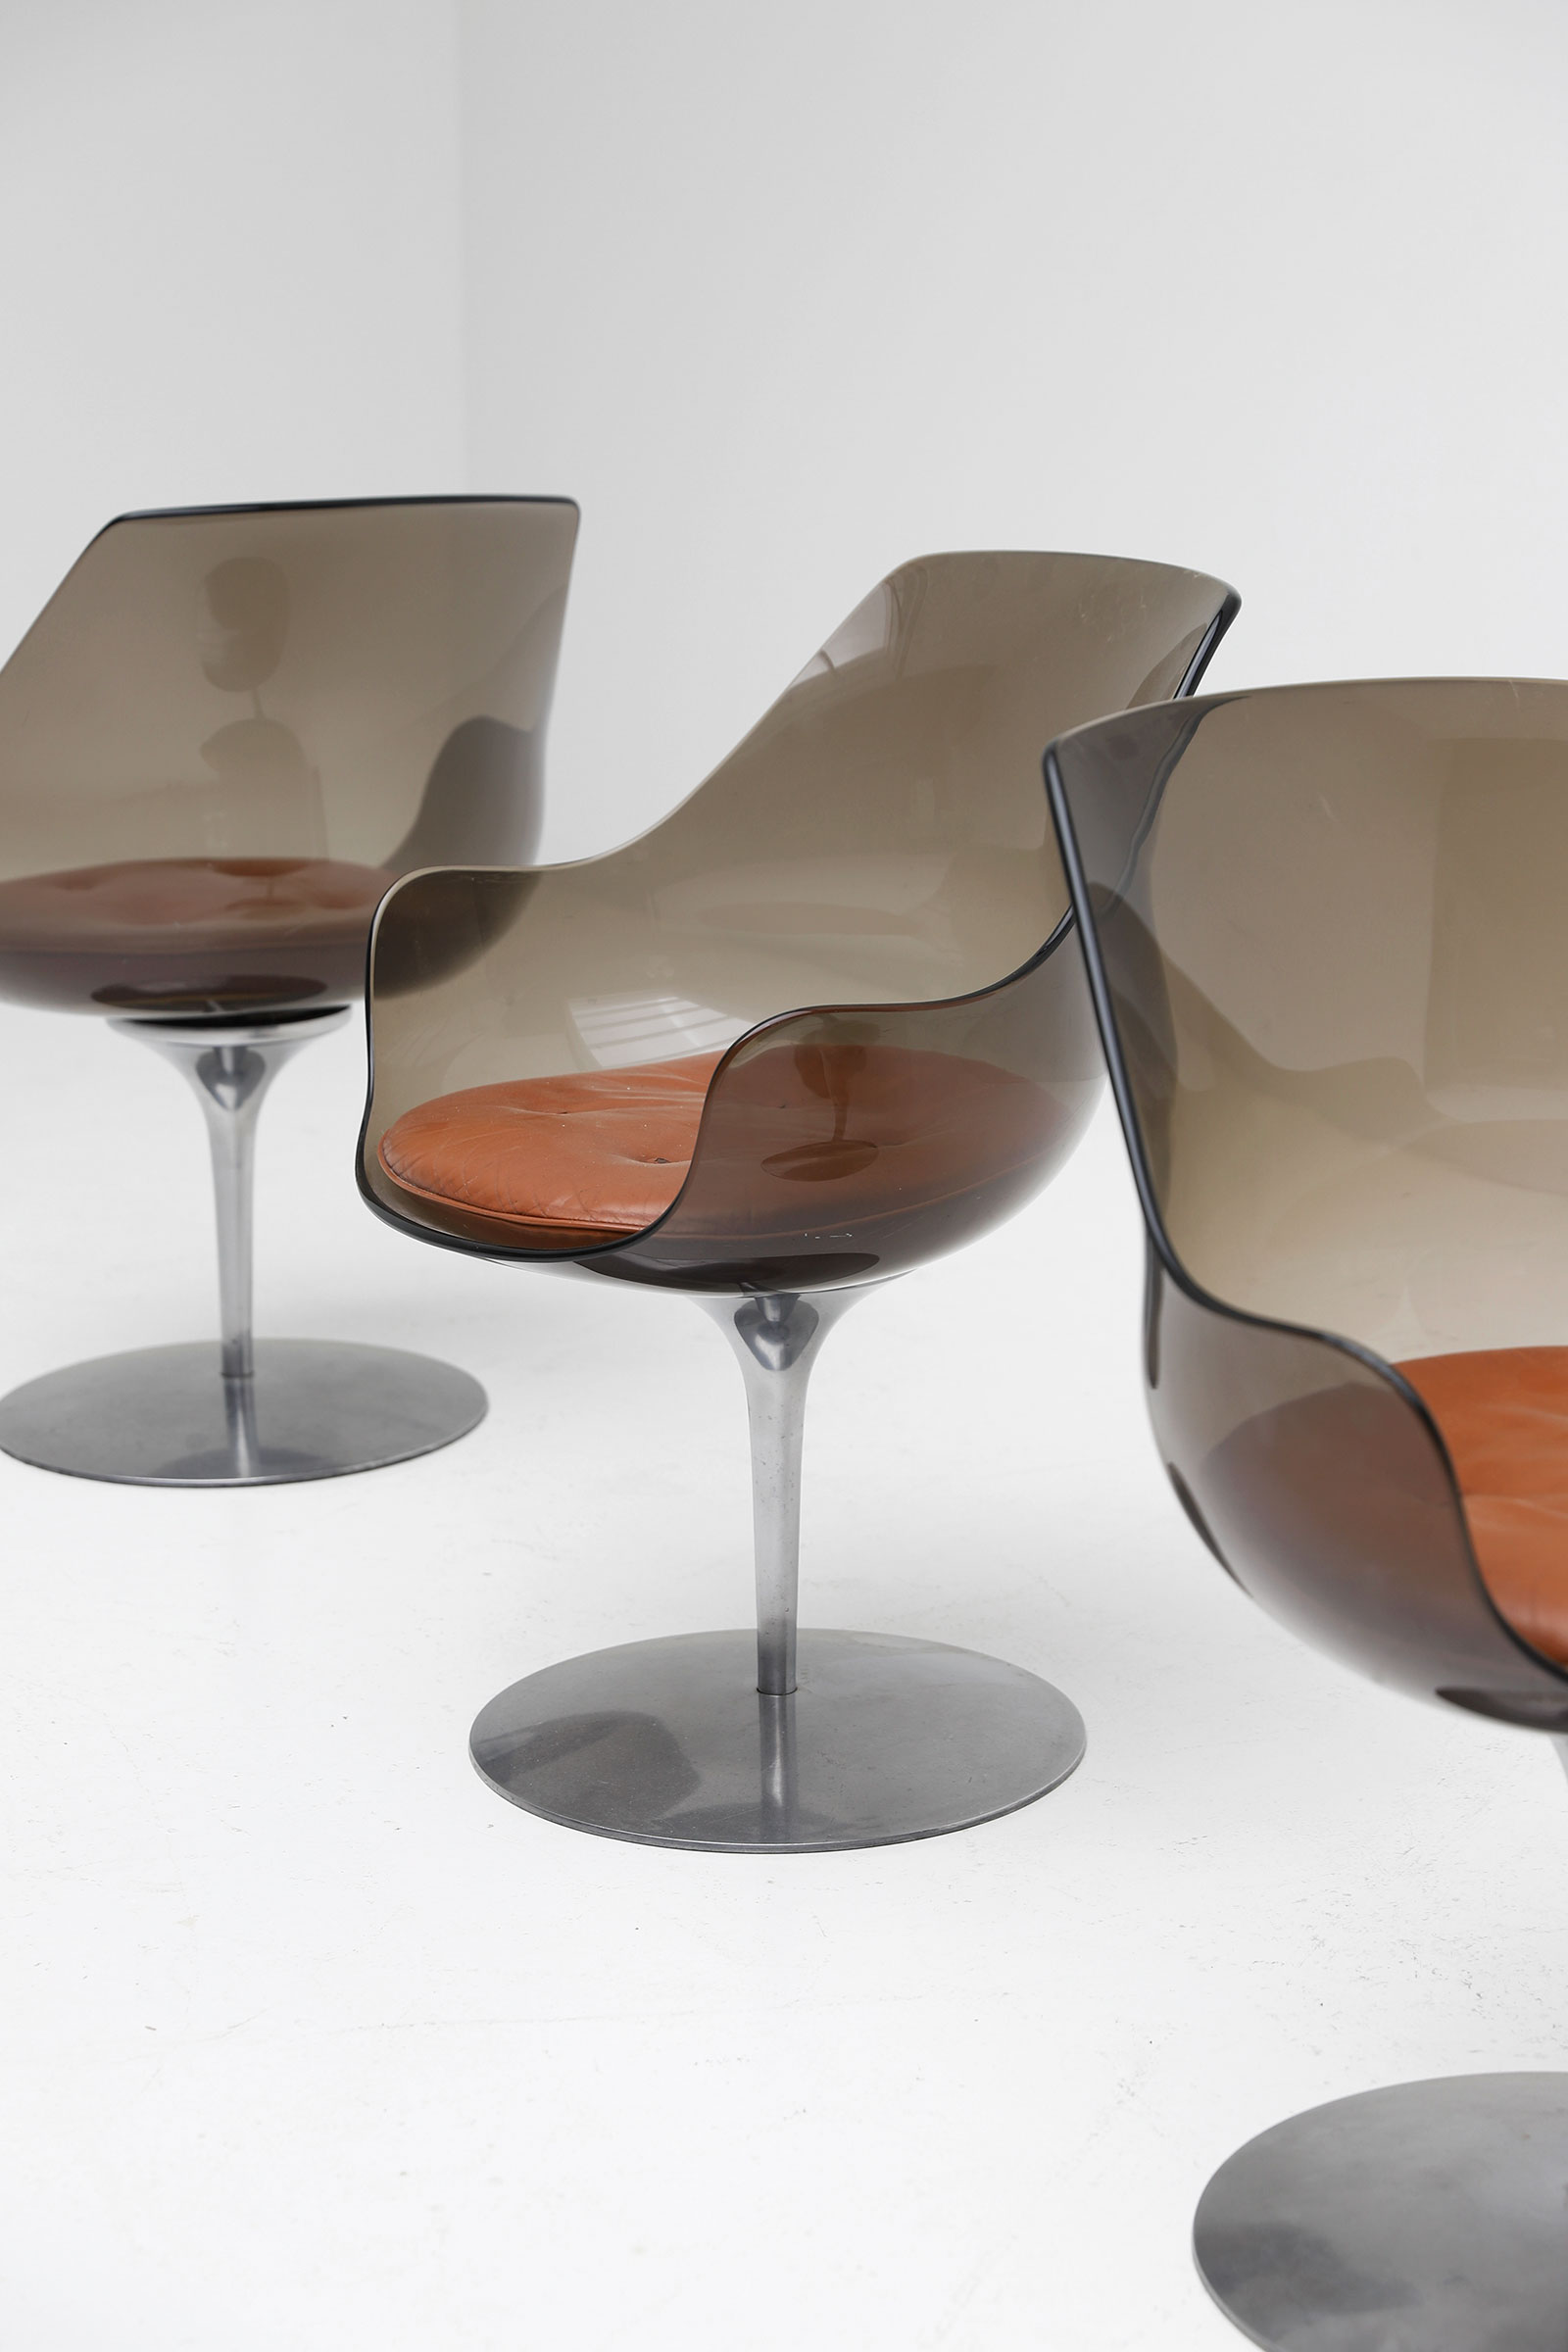 Laverne Champagne Chairs for  Formes Nouvellesimage 6